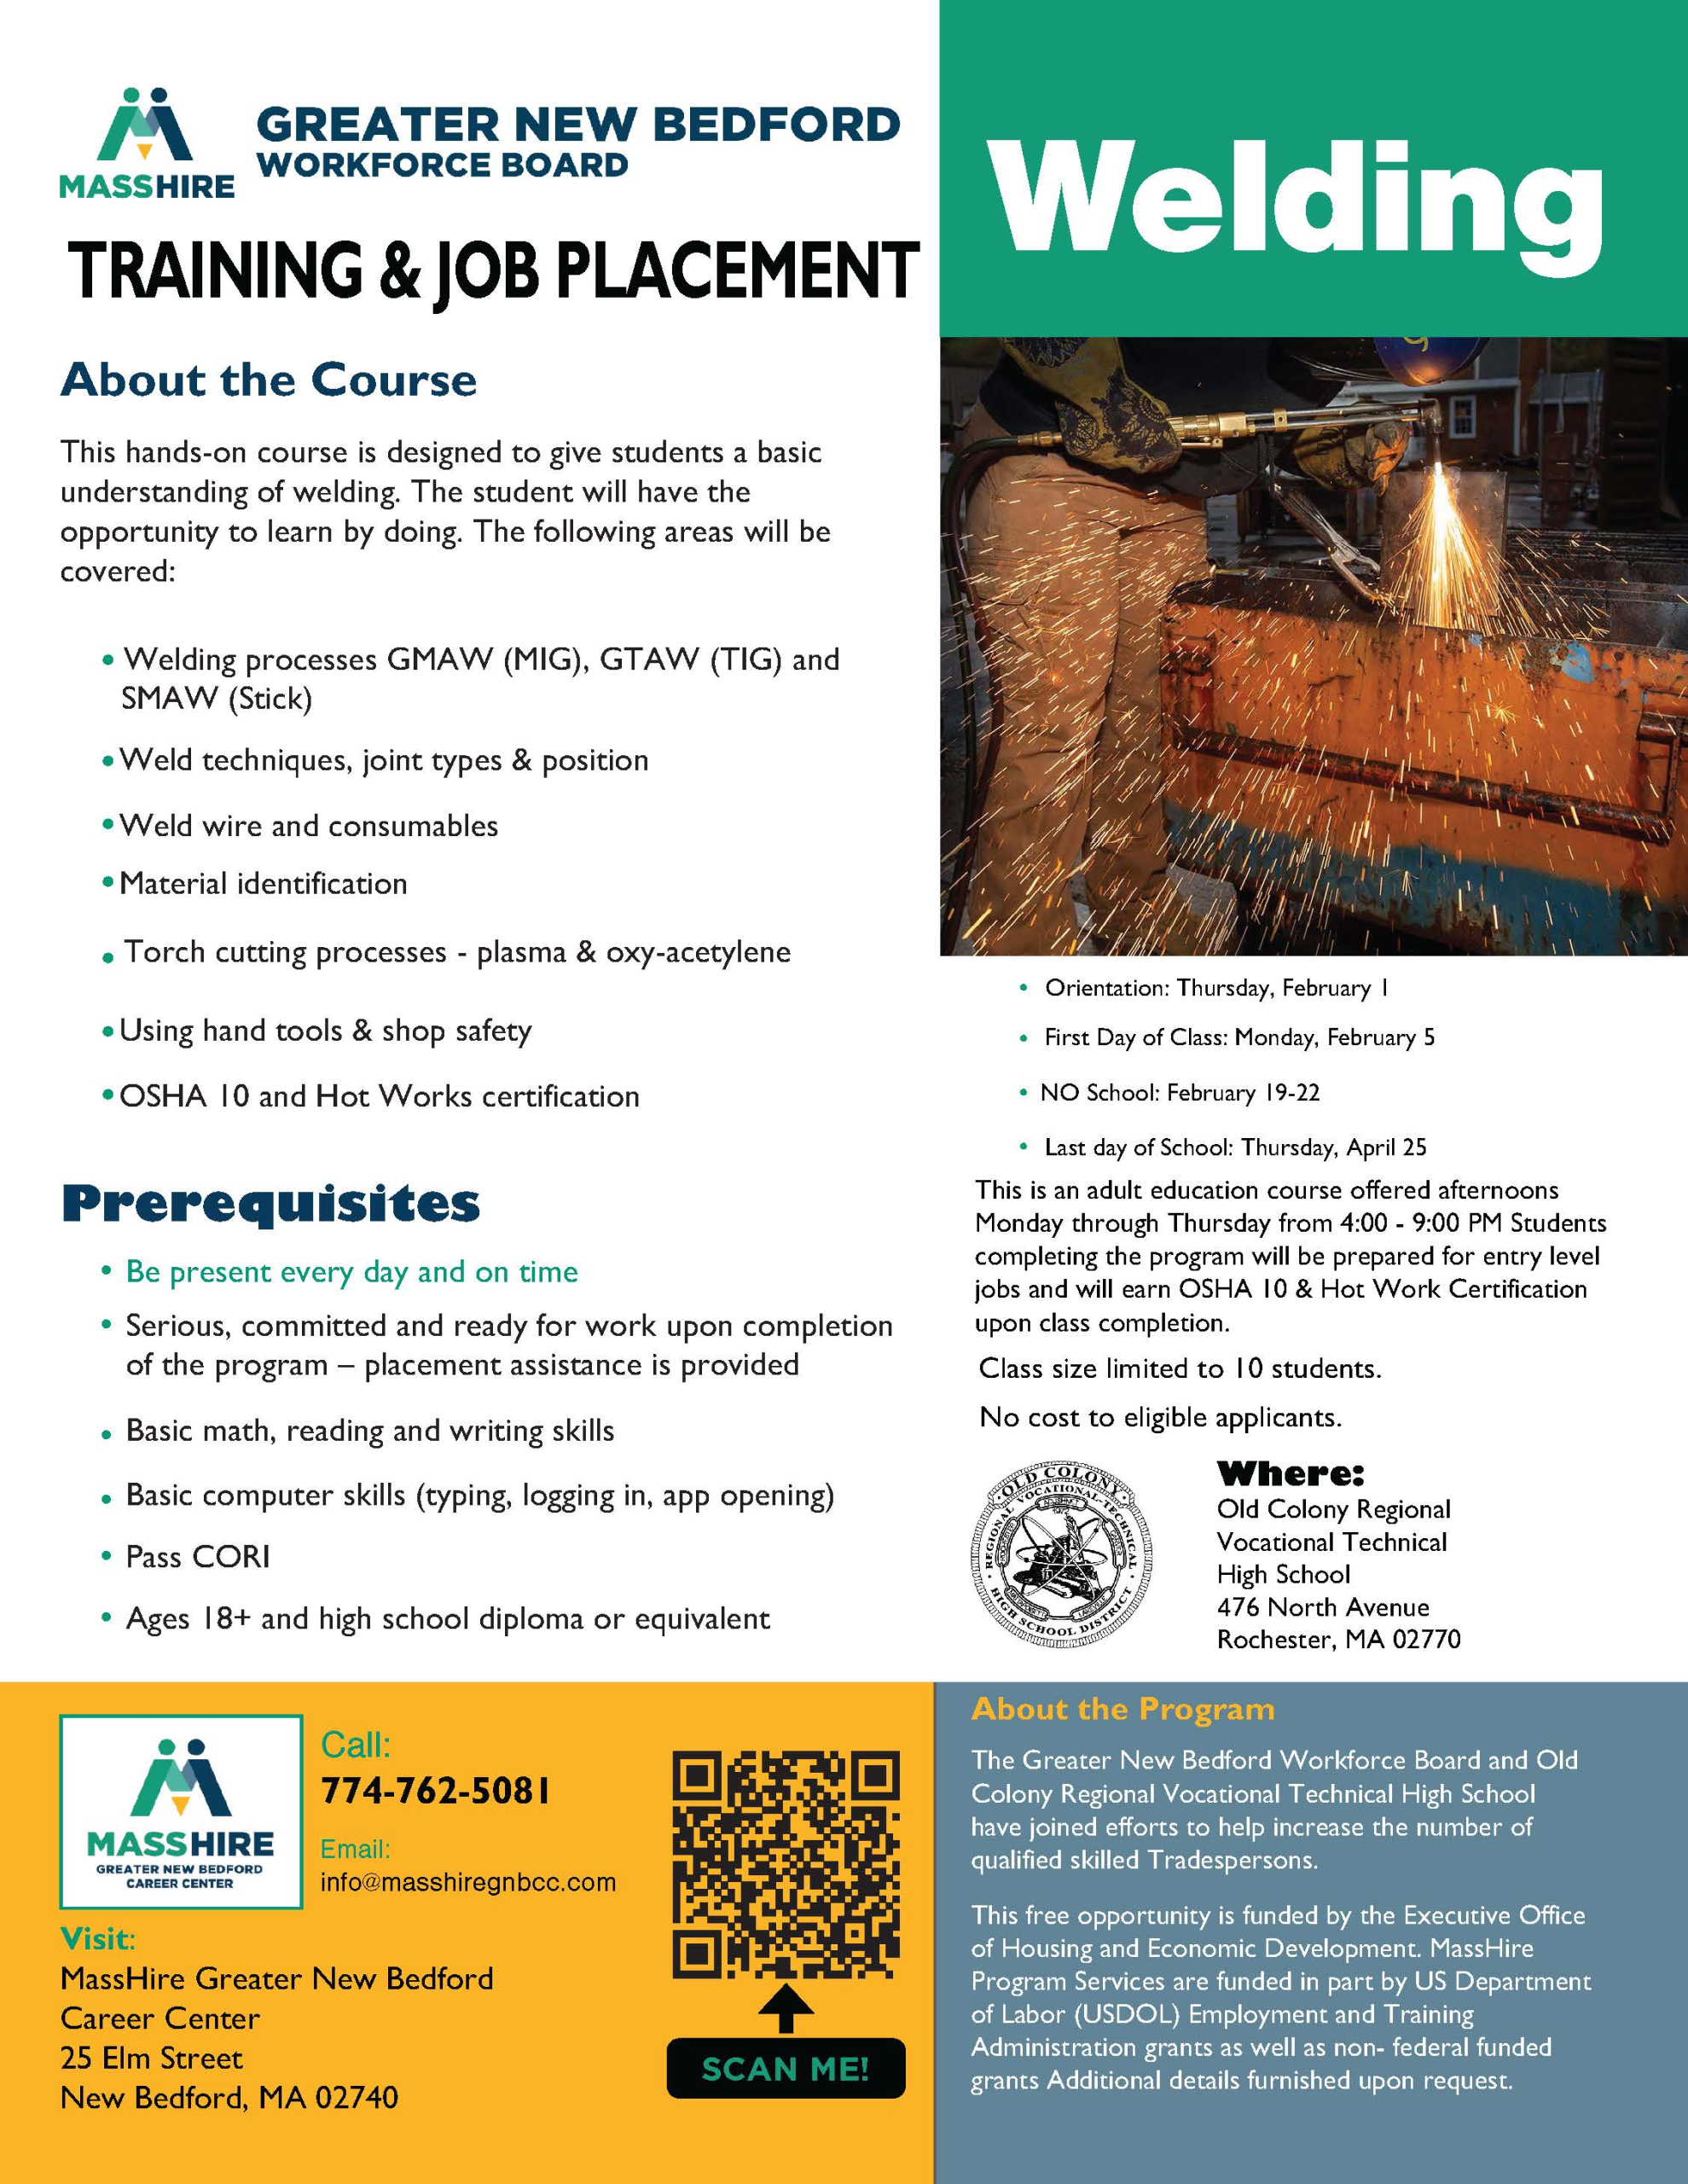 Welding Training and Job Placement